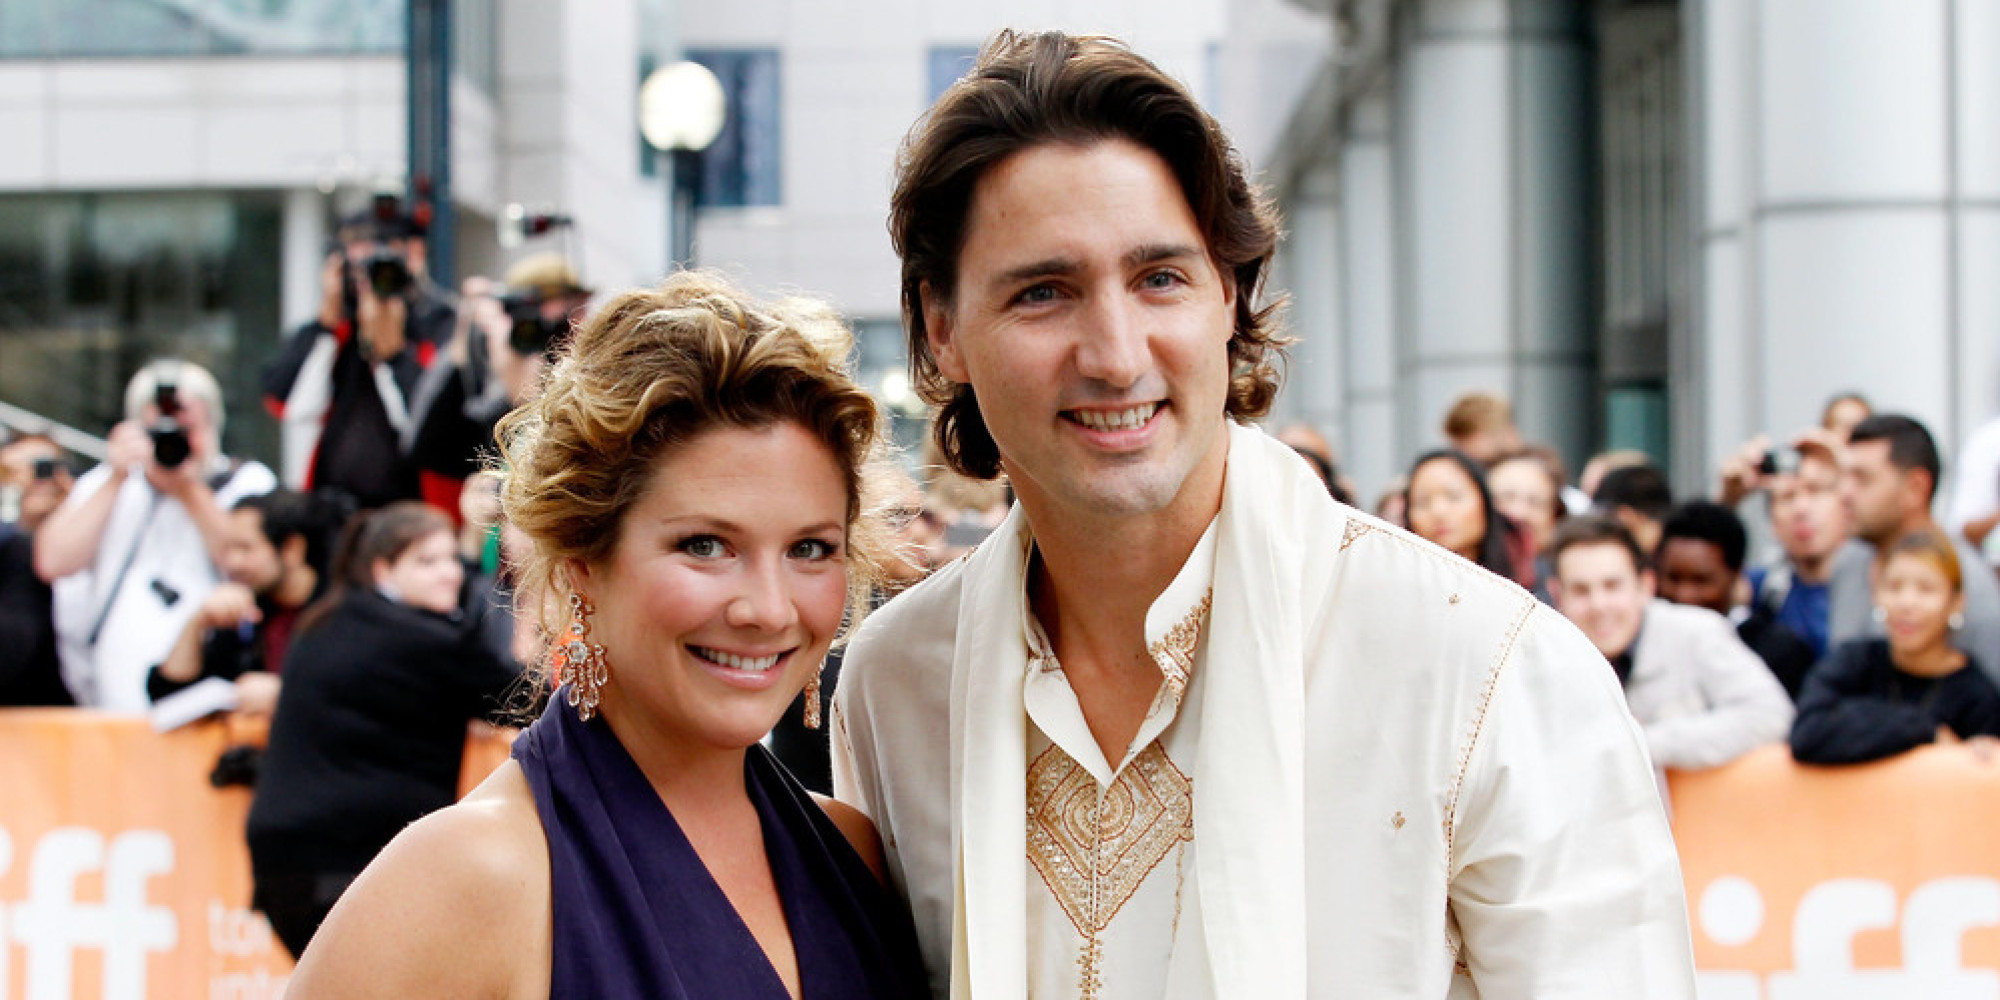 TORONTO, ON - SEPTEMBER 09:  Sophie Gregoire and Justin Trudeau arrive at the "Midnight's Children" Premiere at the 2012 Toronto International Film Festival at Roy Thomson Hall on September 9, 2012 in Toronto, Canada.  (Photo by Jemal Countess/Getty Images)